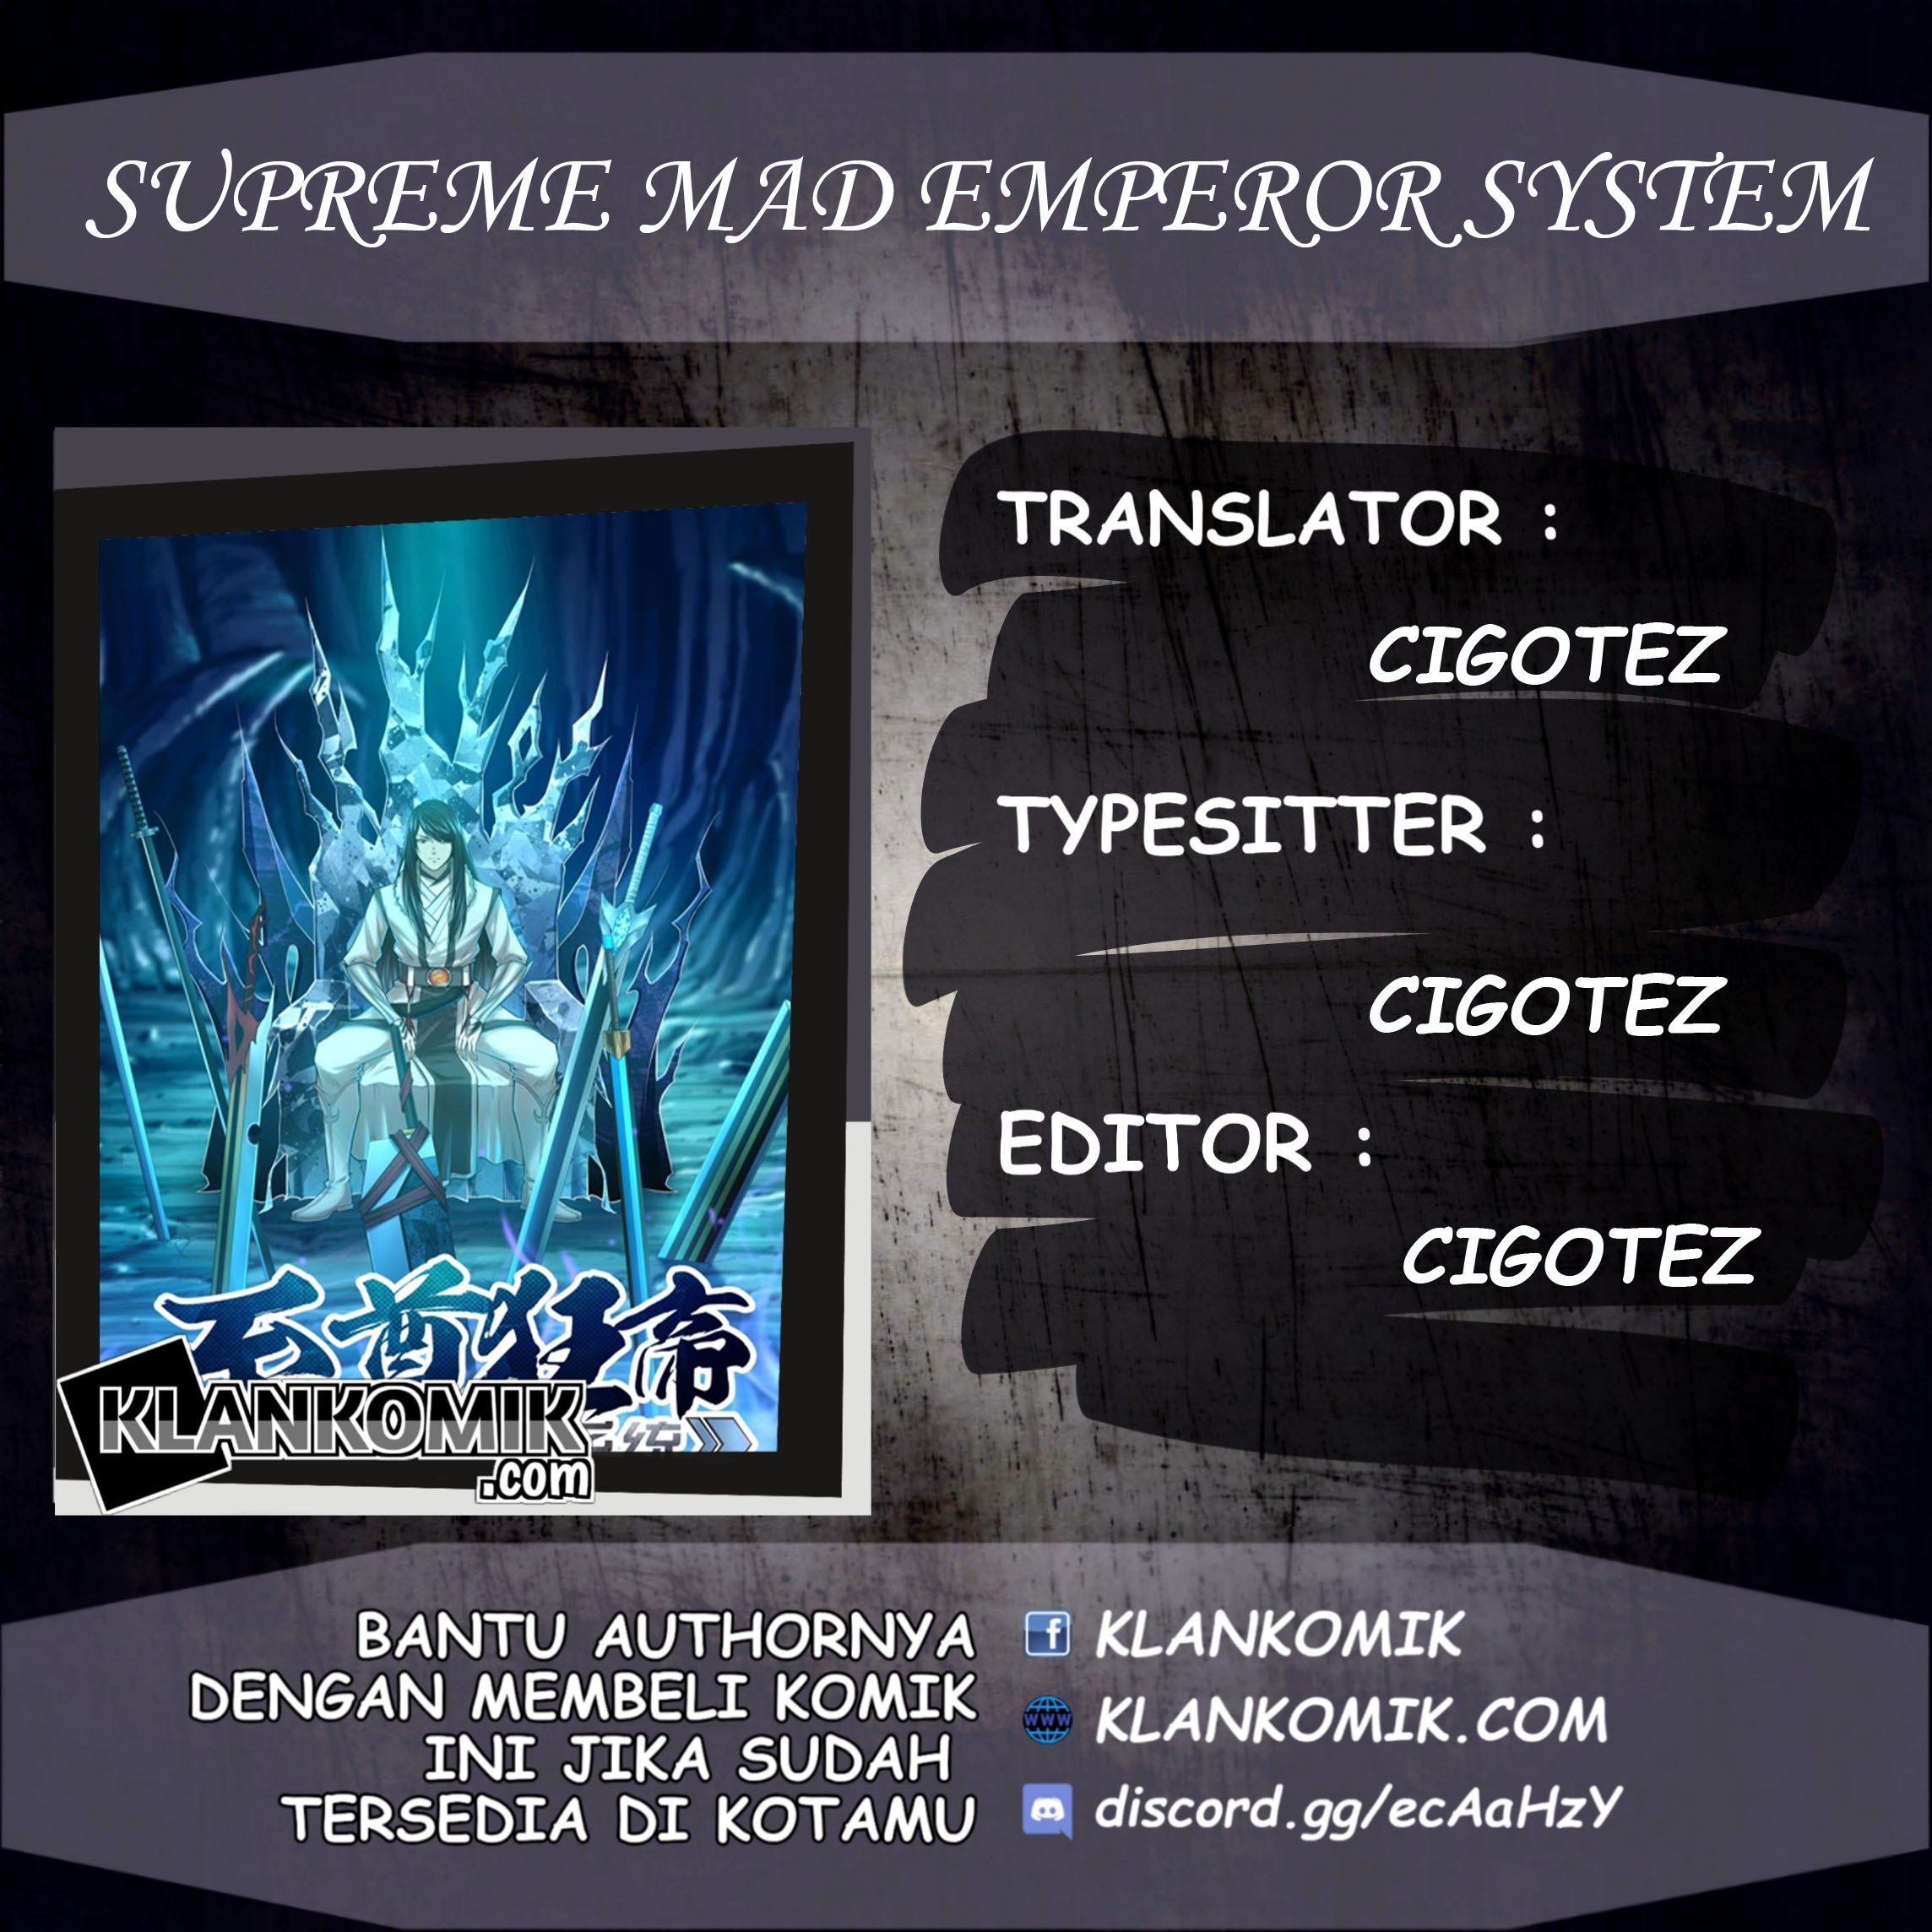 Extreme Mad Emperor System (Supreme Mad Emperor System) Chapter 14